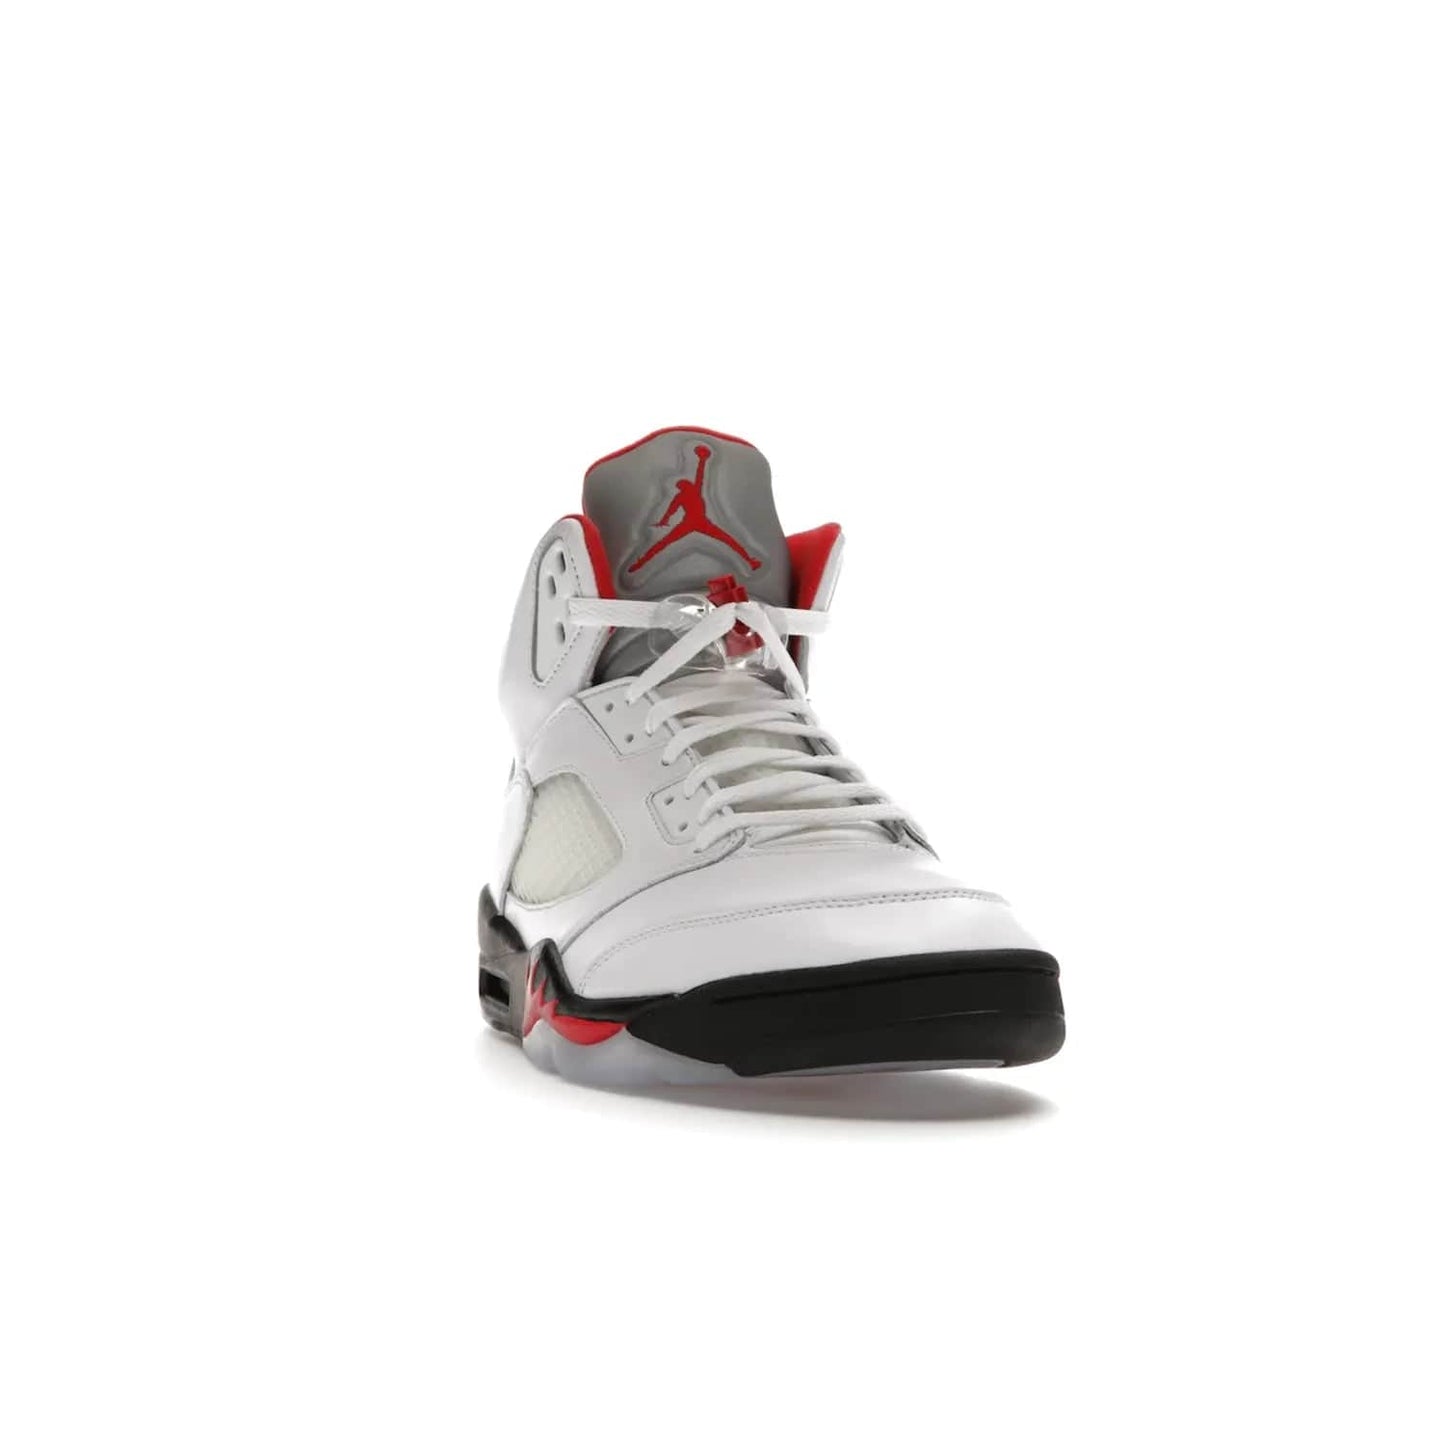 Jordan 5 Retro Fire Red Silver Tongue (2020) - Image 8 - Only at www.BallersClubKickz.com - Experience classic styling with the Jordan 5 Retro Fire Red Silver Tongue (2020). Features a white leather upper, 3M reflective tongue, midsole colorblocking, and an icy translucent outsole. Now available, upgrade your shoe collection today.